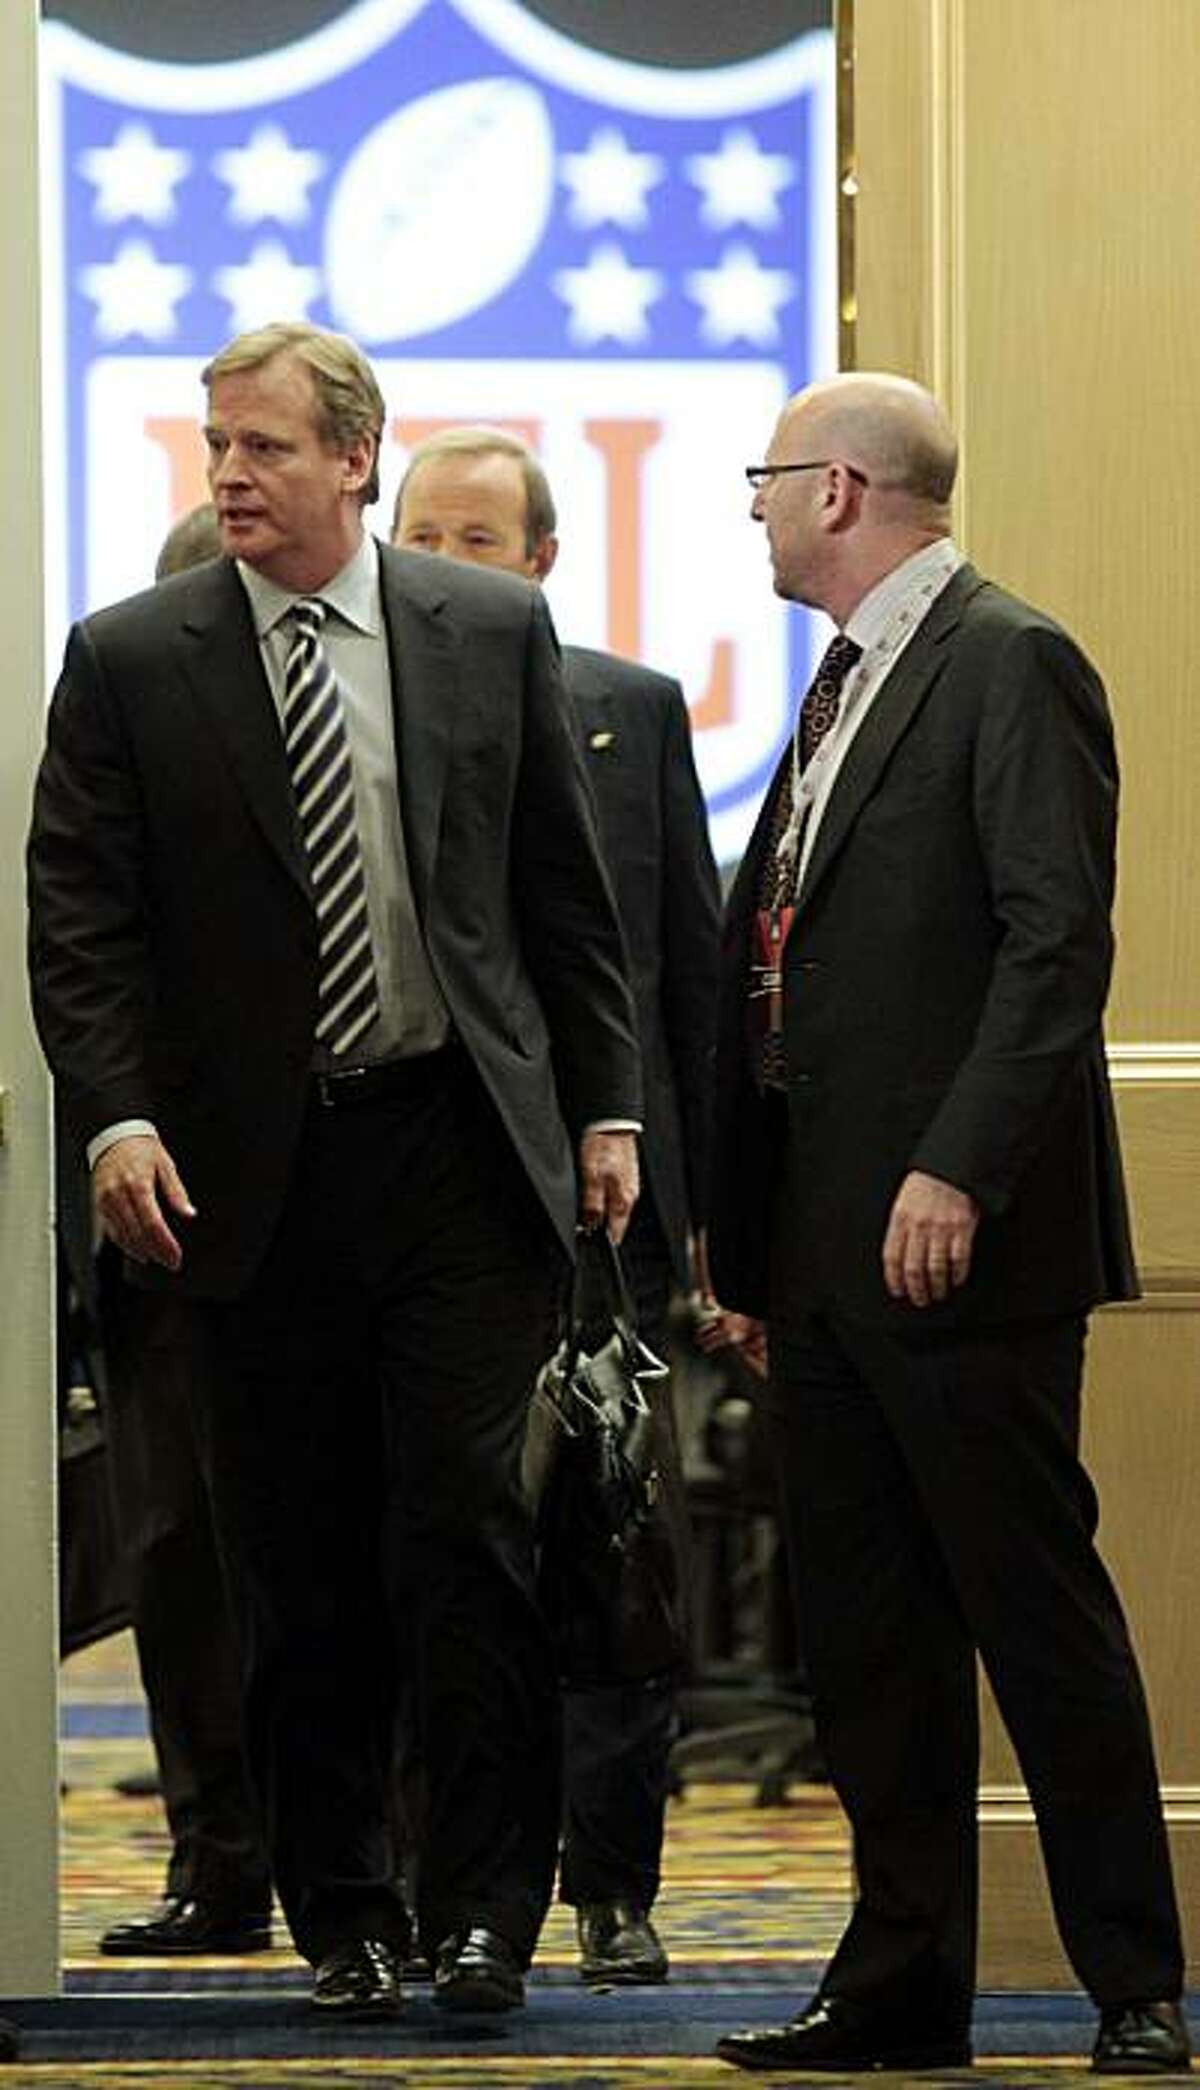 NFL commissioner Roger Goodell, left, leaves a meeting with NFL owners at a hotel in Chantilly, Va., Wednesday, March 2, 2011. NFL owners ended their special labor meeting without taking any action, just 30 hours before the collective bargaining agreementwith the football players expires.